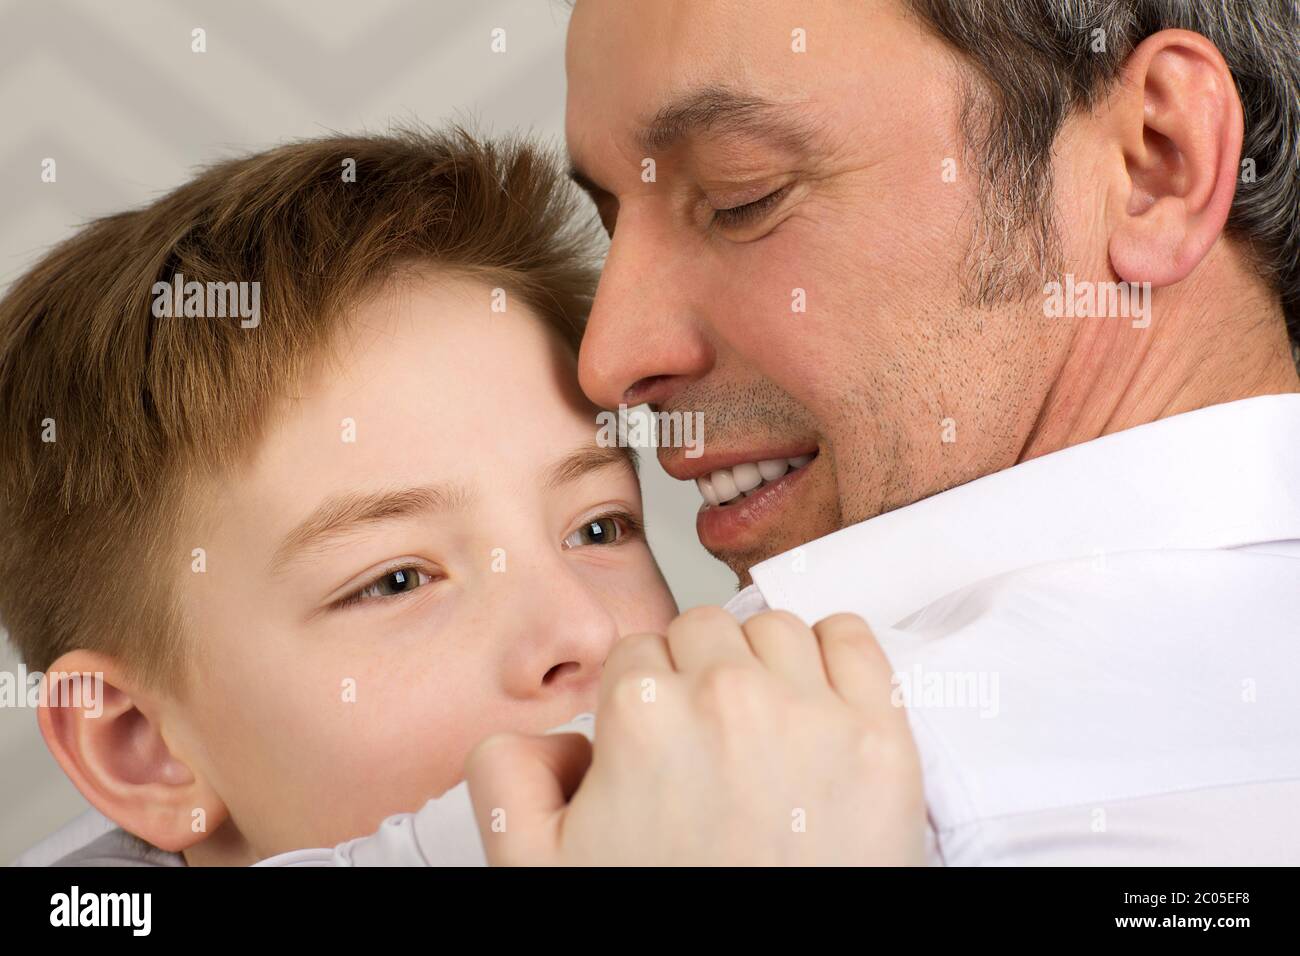 Sincere love of parent and child Stock Photo